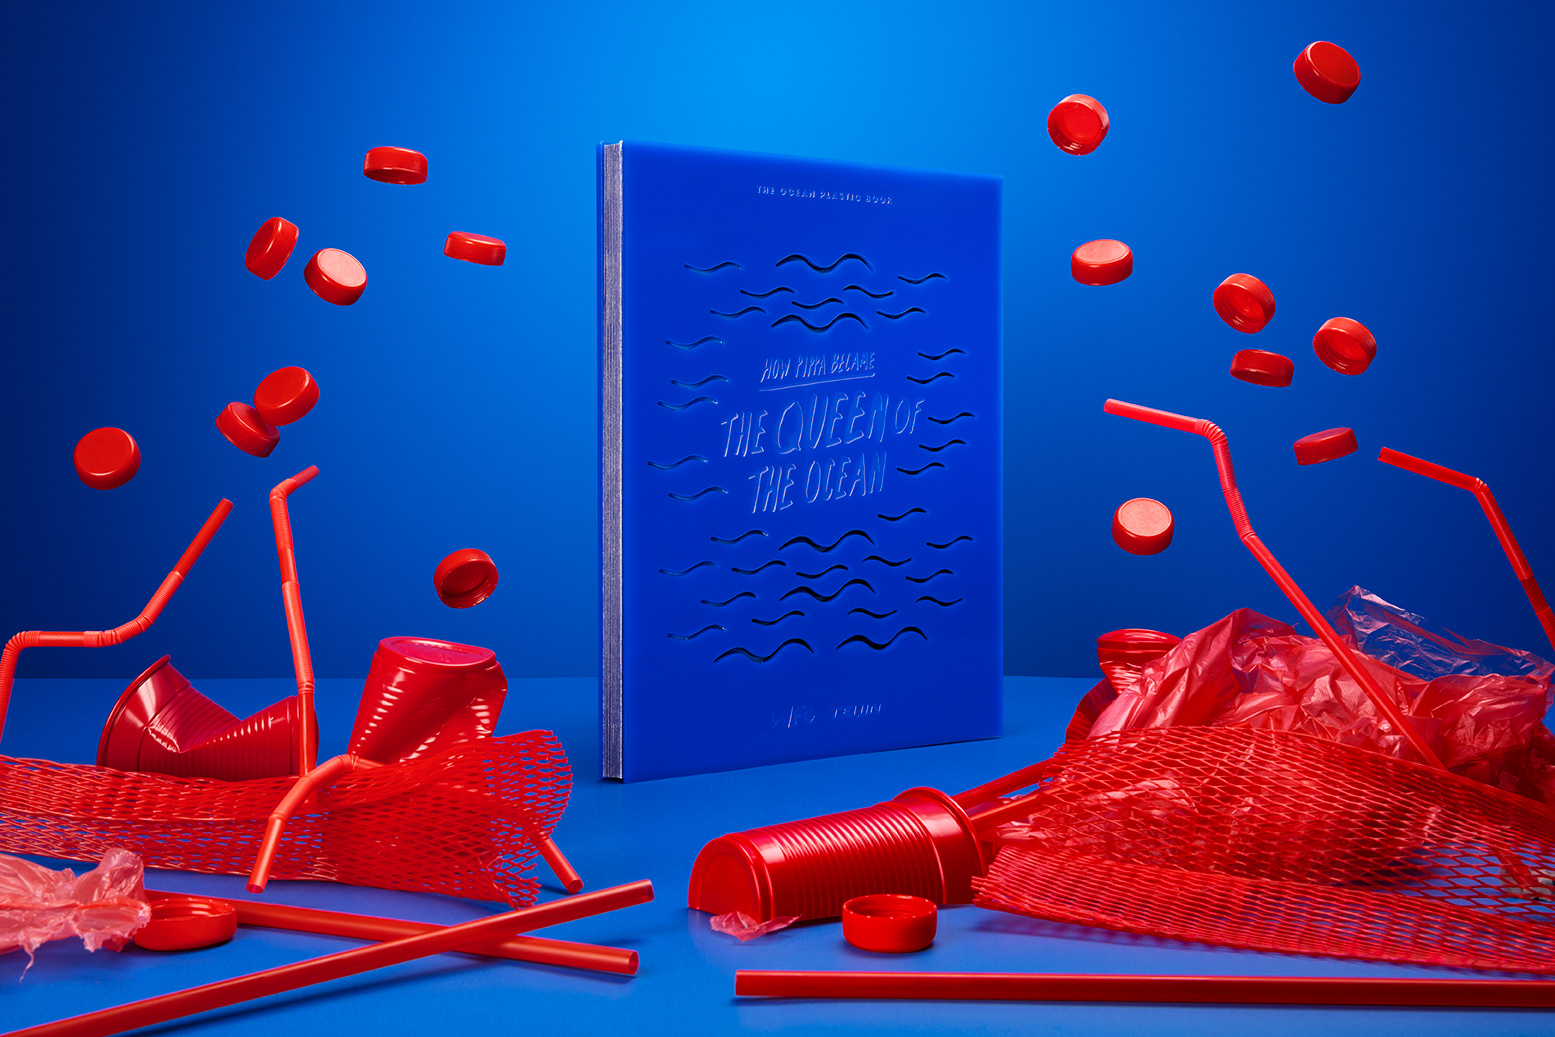 the Queen of the Ocean book with  red plastic waste surrounding it.